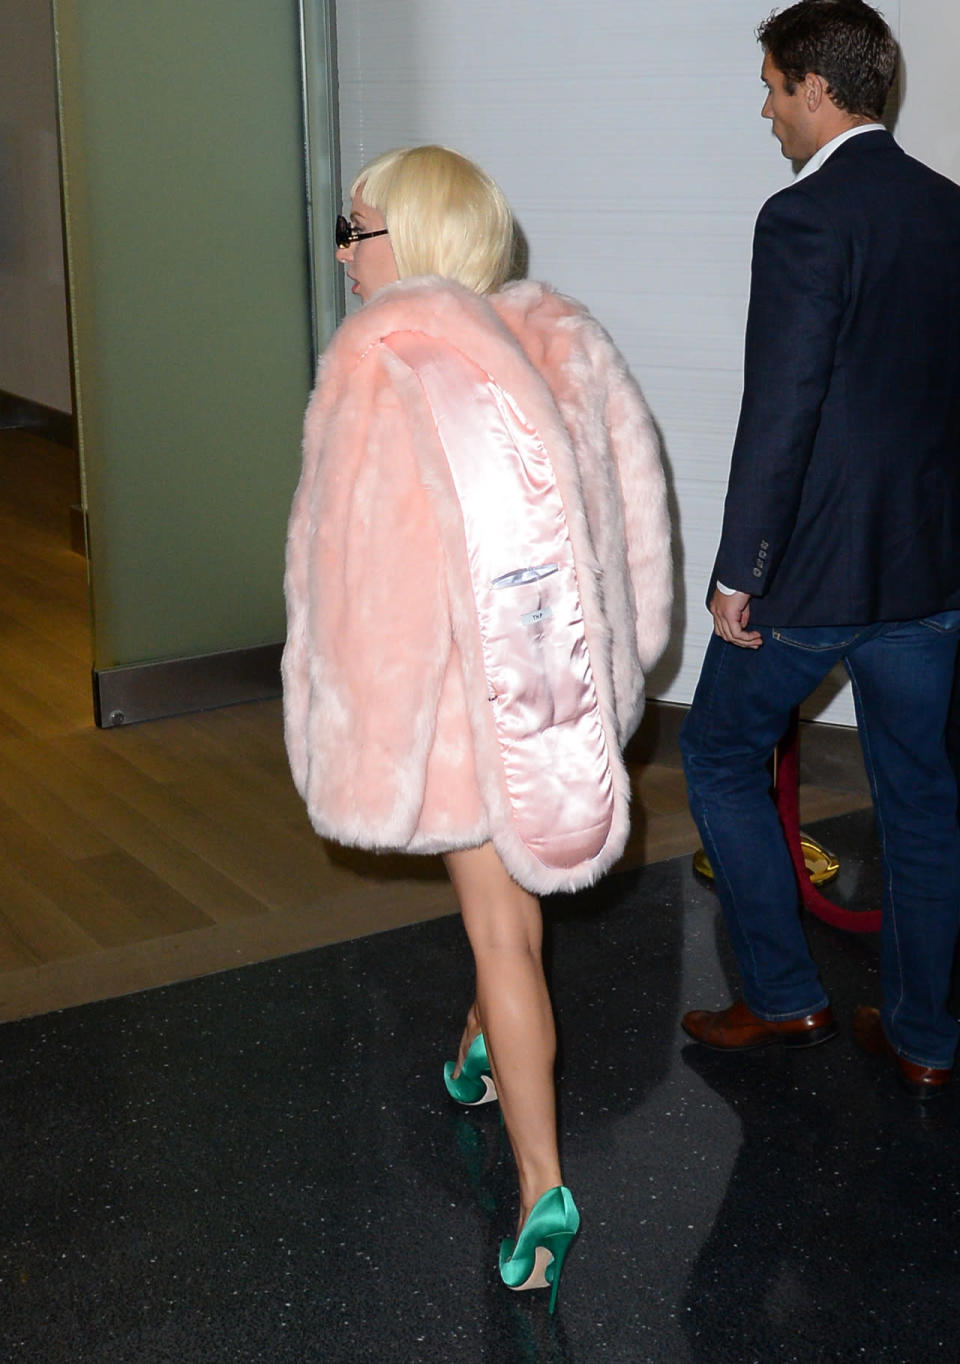 Lady Gaga’s cotton candy-pink outfit from the back.